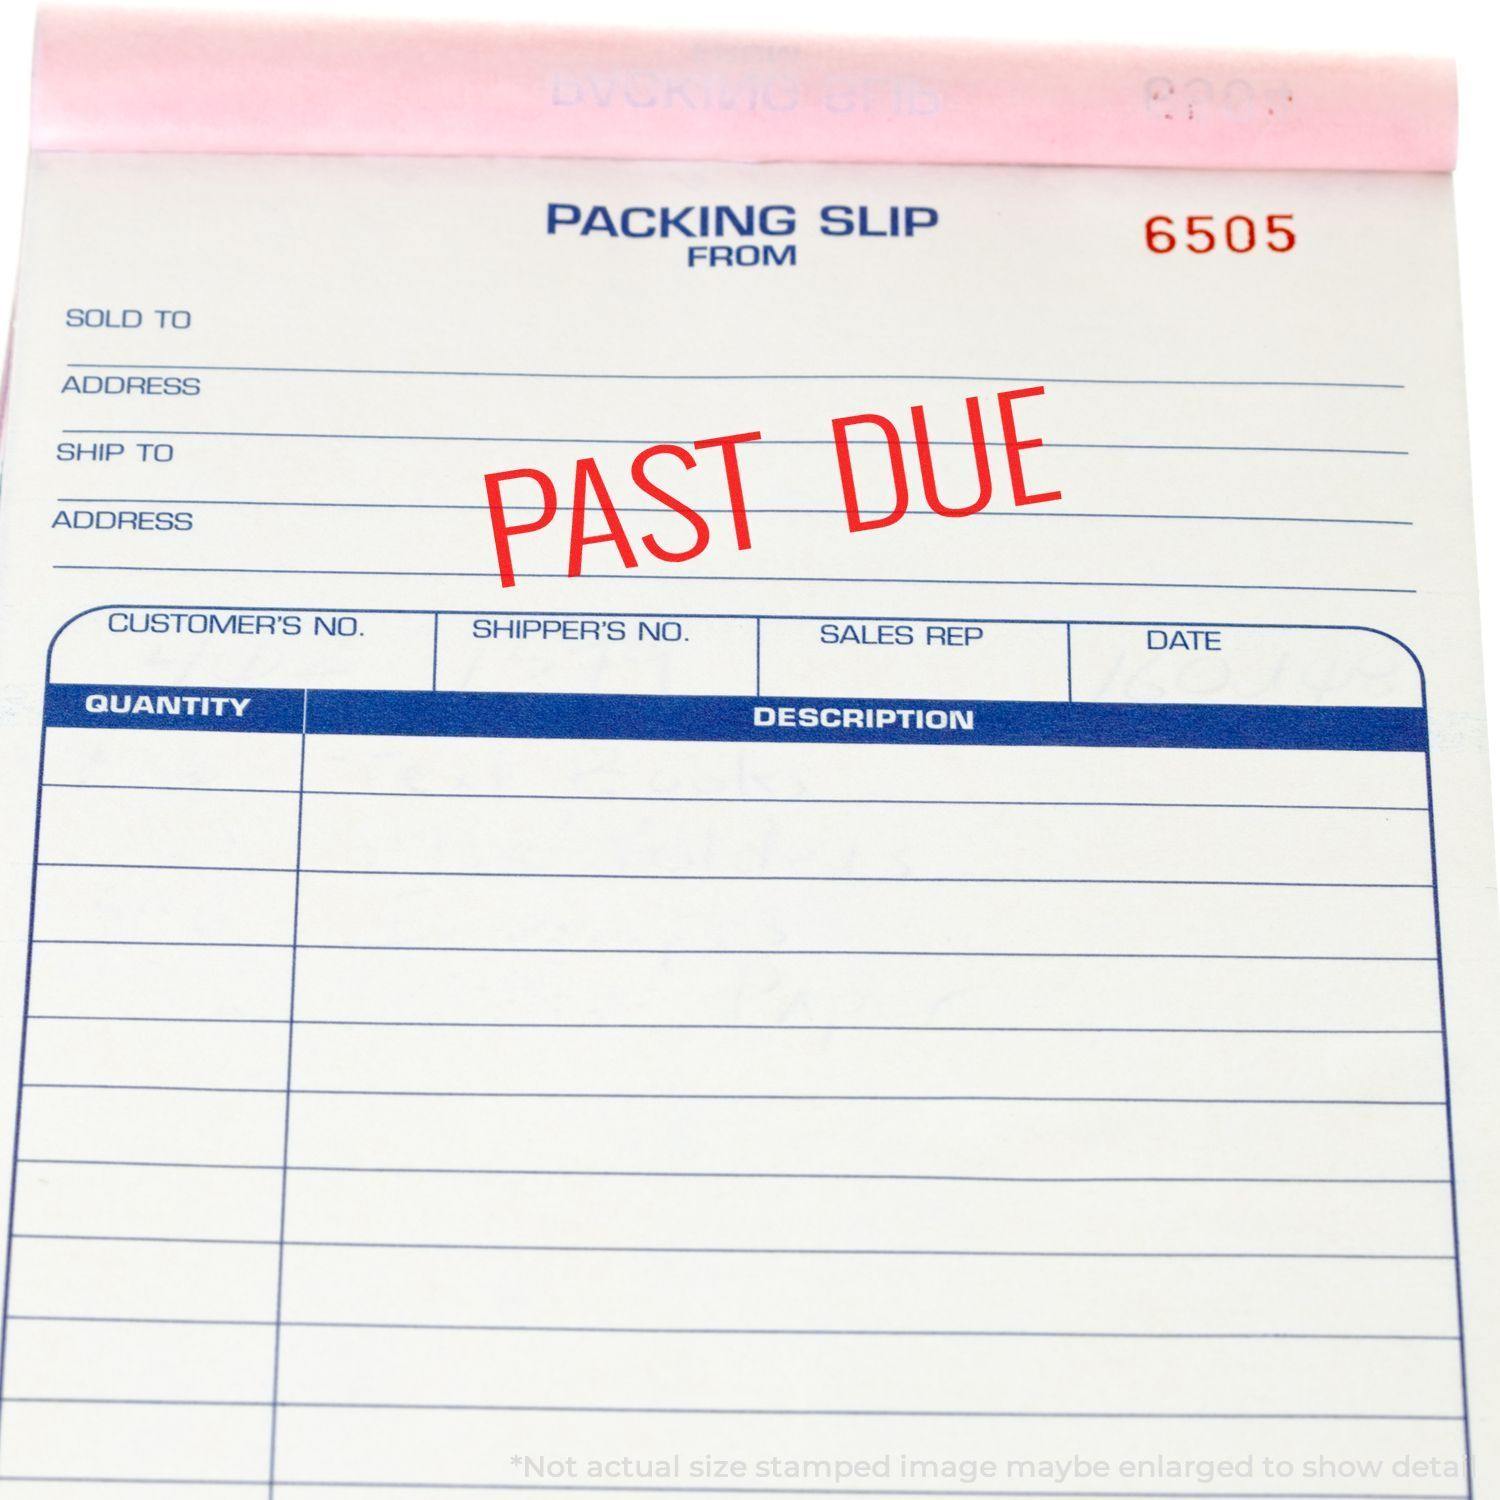 A stock office rubber stamp with a stamped image showing how the text "PAST DUE" in a narrow font is displayed after stamping.